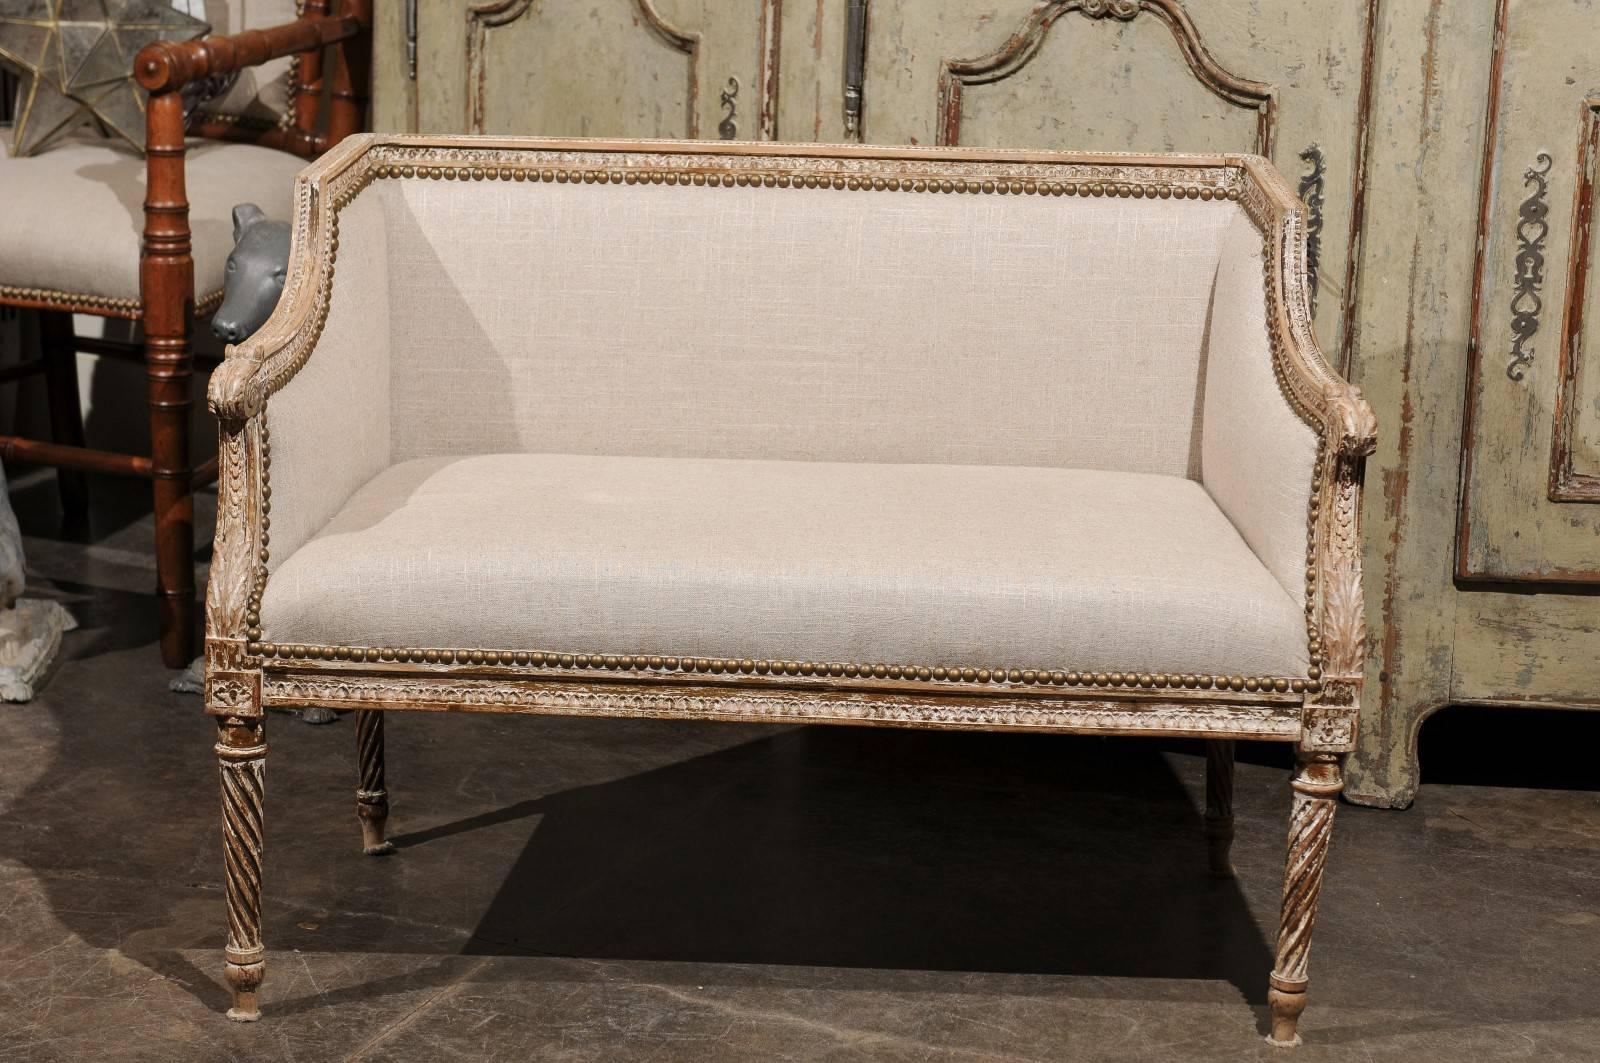 A French Louis XVI style petite wooden bench with distressed paint and linen upholstery from the 1820s-1840s. This French small bench features a straight back and scrolled arms framing a rectangular seat. The back, solid arms and seat are covered in